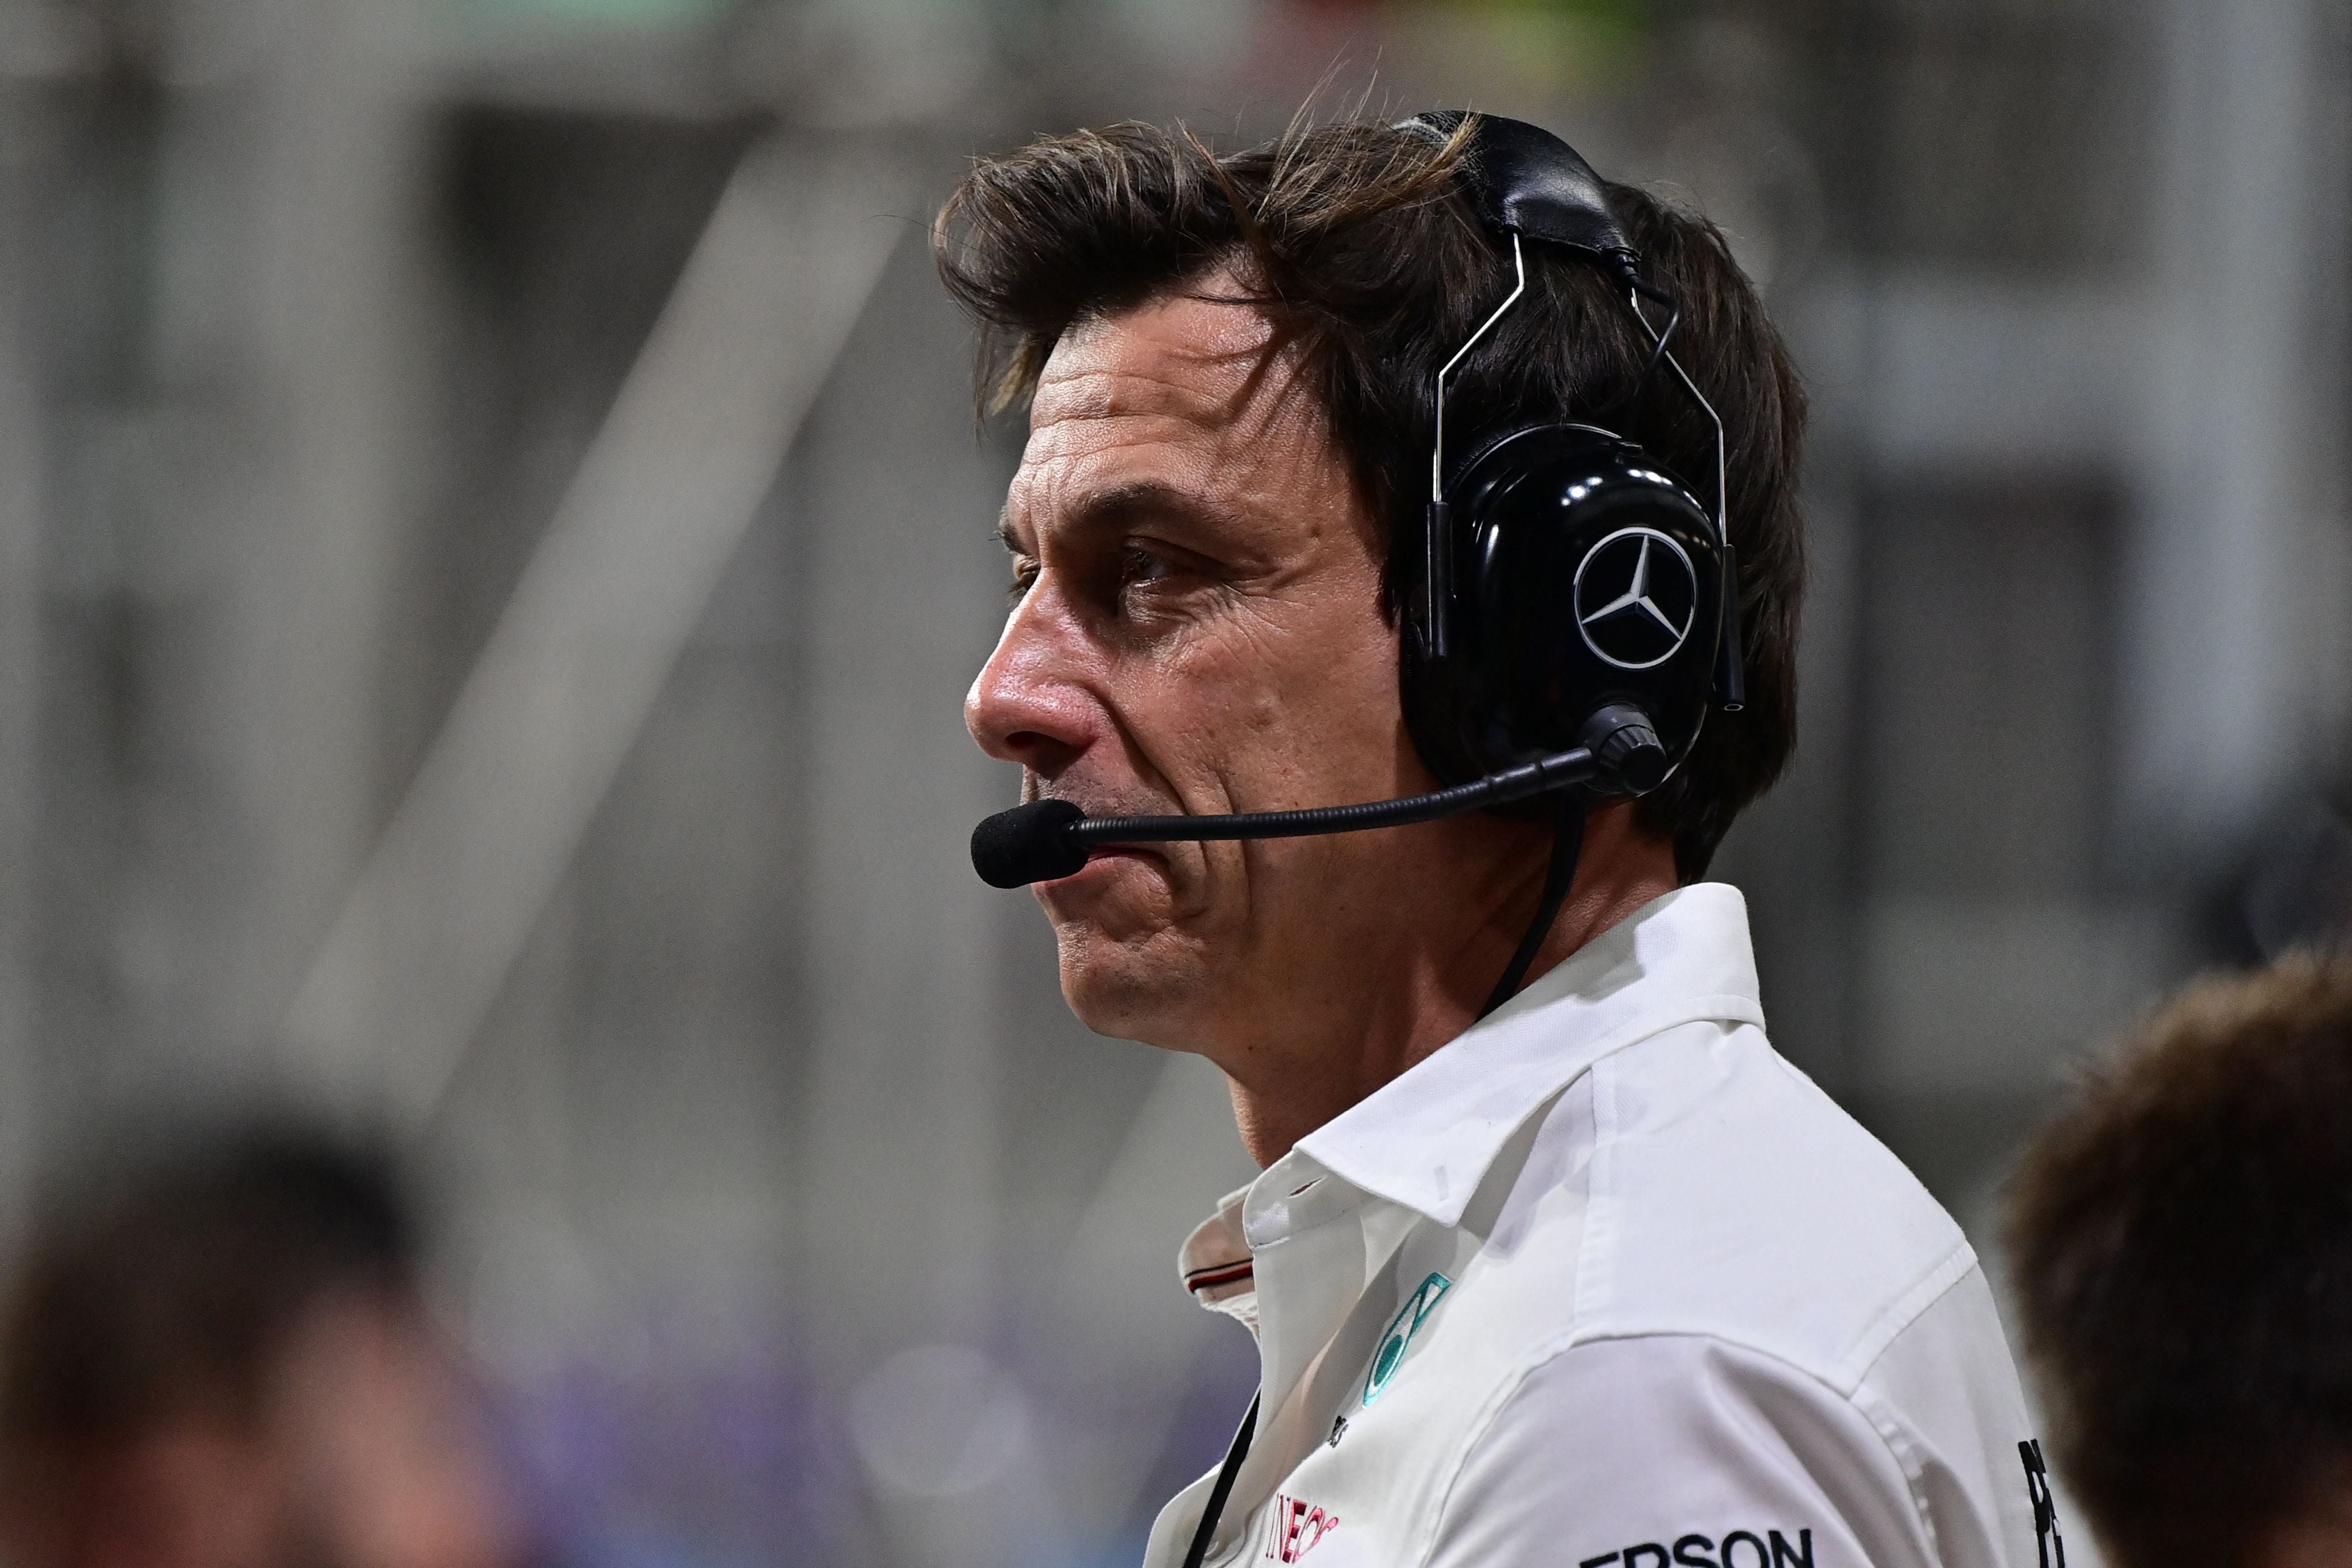 Toto Wolff has revealed that he has seen a psychiatrist for the past 18 years